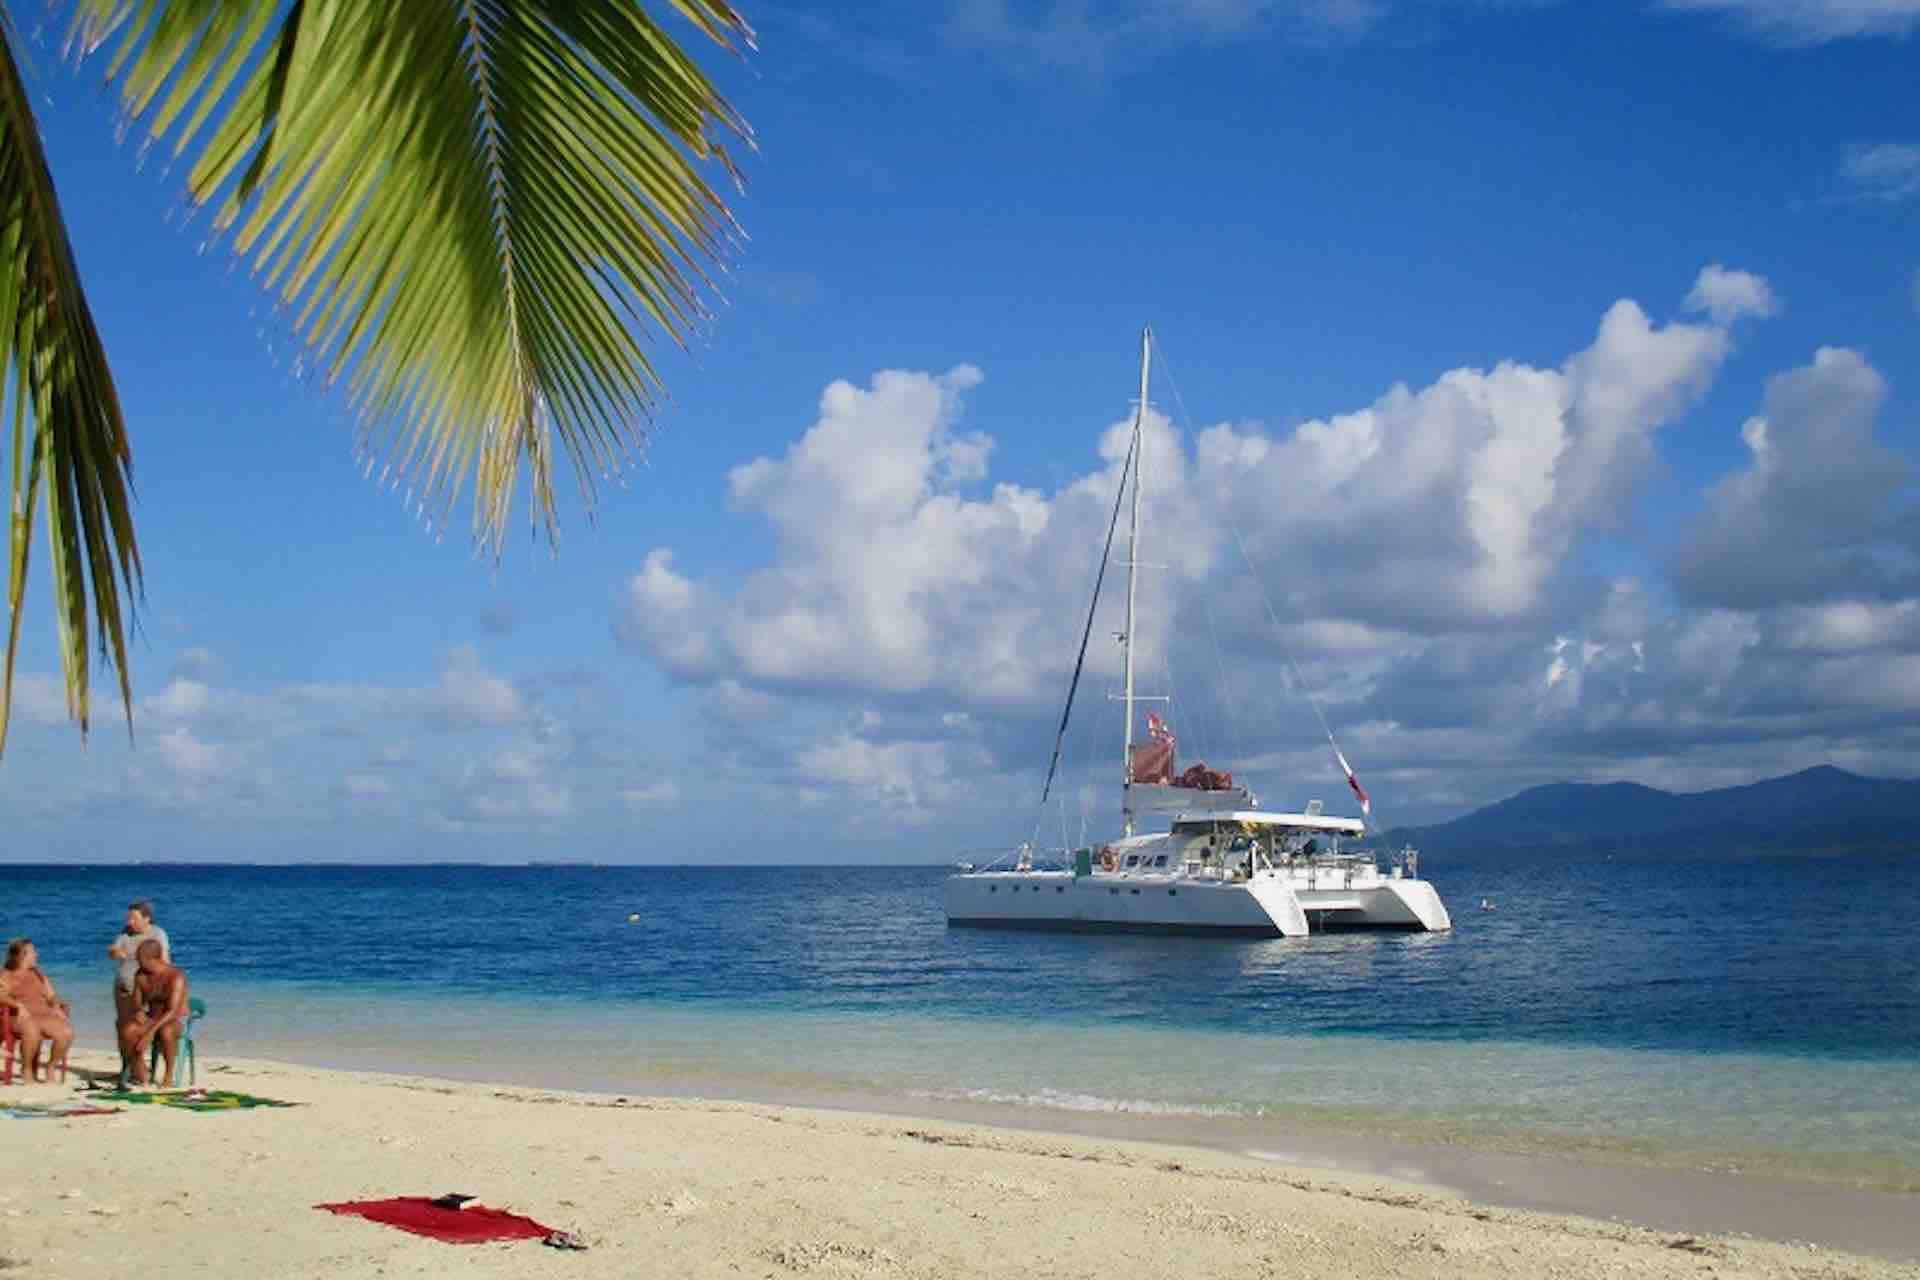 Taboga island tour catamaran anchored in front of beach with palm tree